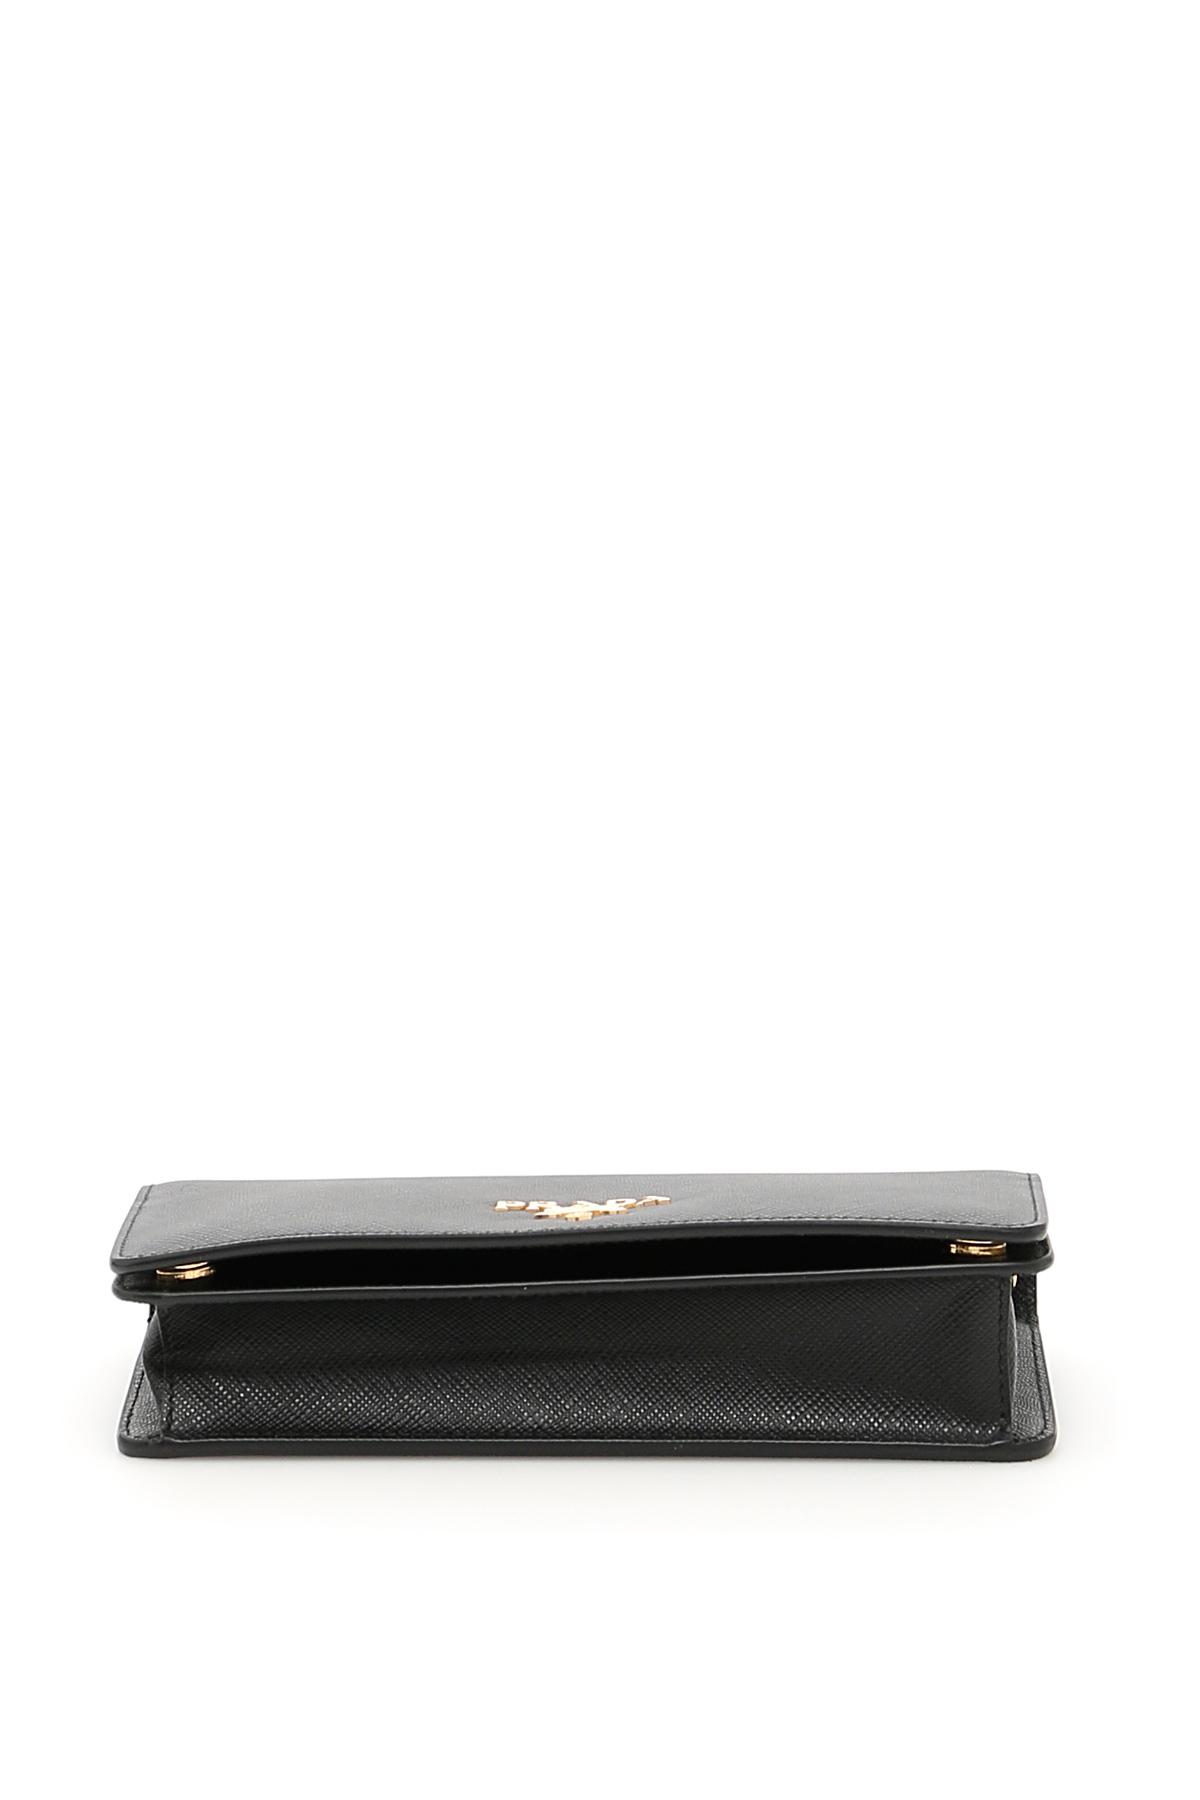 Prada Logo Quilted-leather Wallet-on-chain in Black